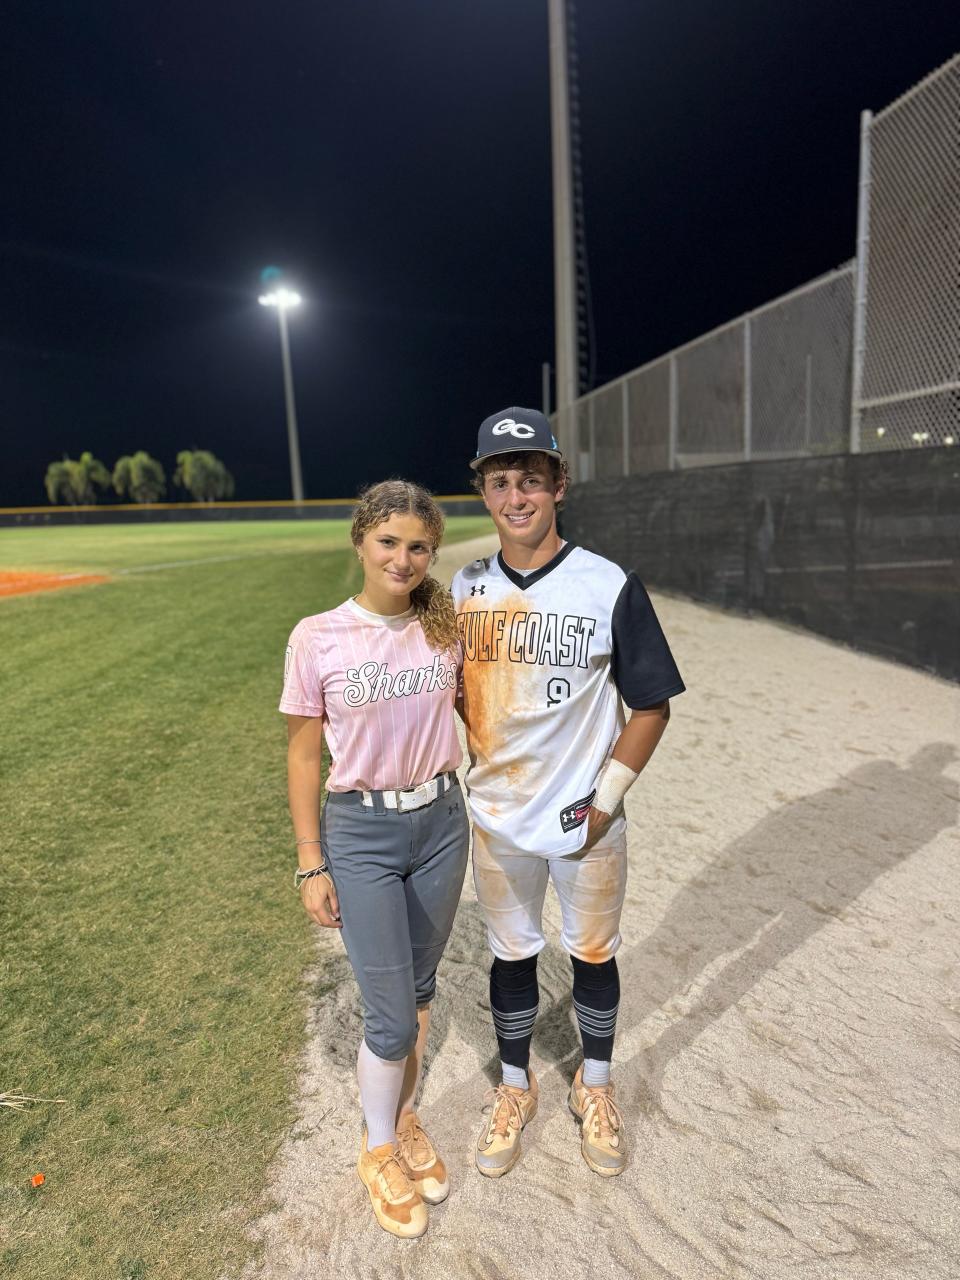 Gulf Coast's Melissa Hyatt (left) and Robert Hyatt (right) pose for a picture together following the baseball team's 4-3 win over Gulf Coast. Both Robert and Melissa delivered walk-off hits in their games Tuesday night.